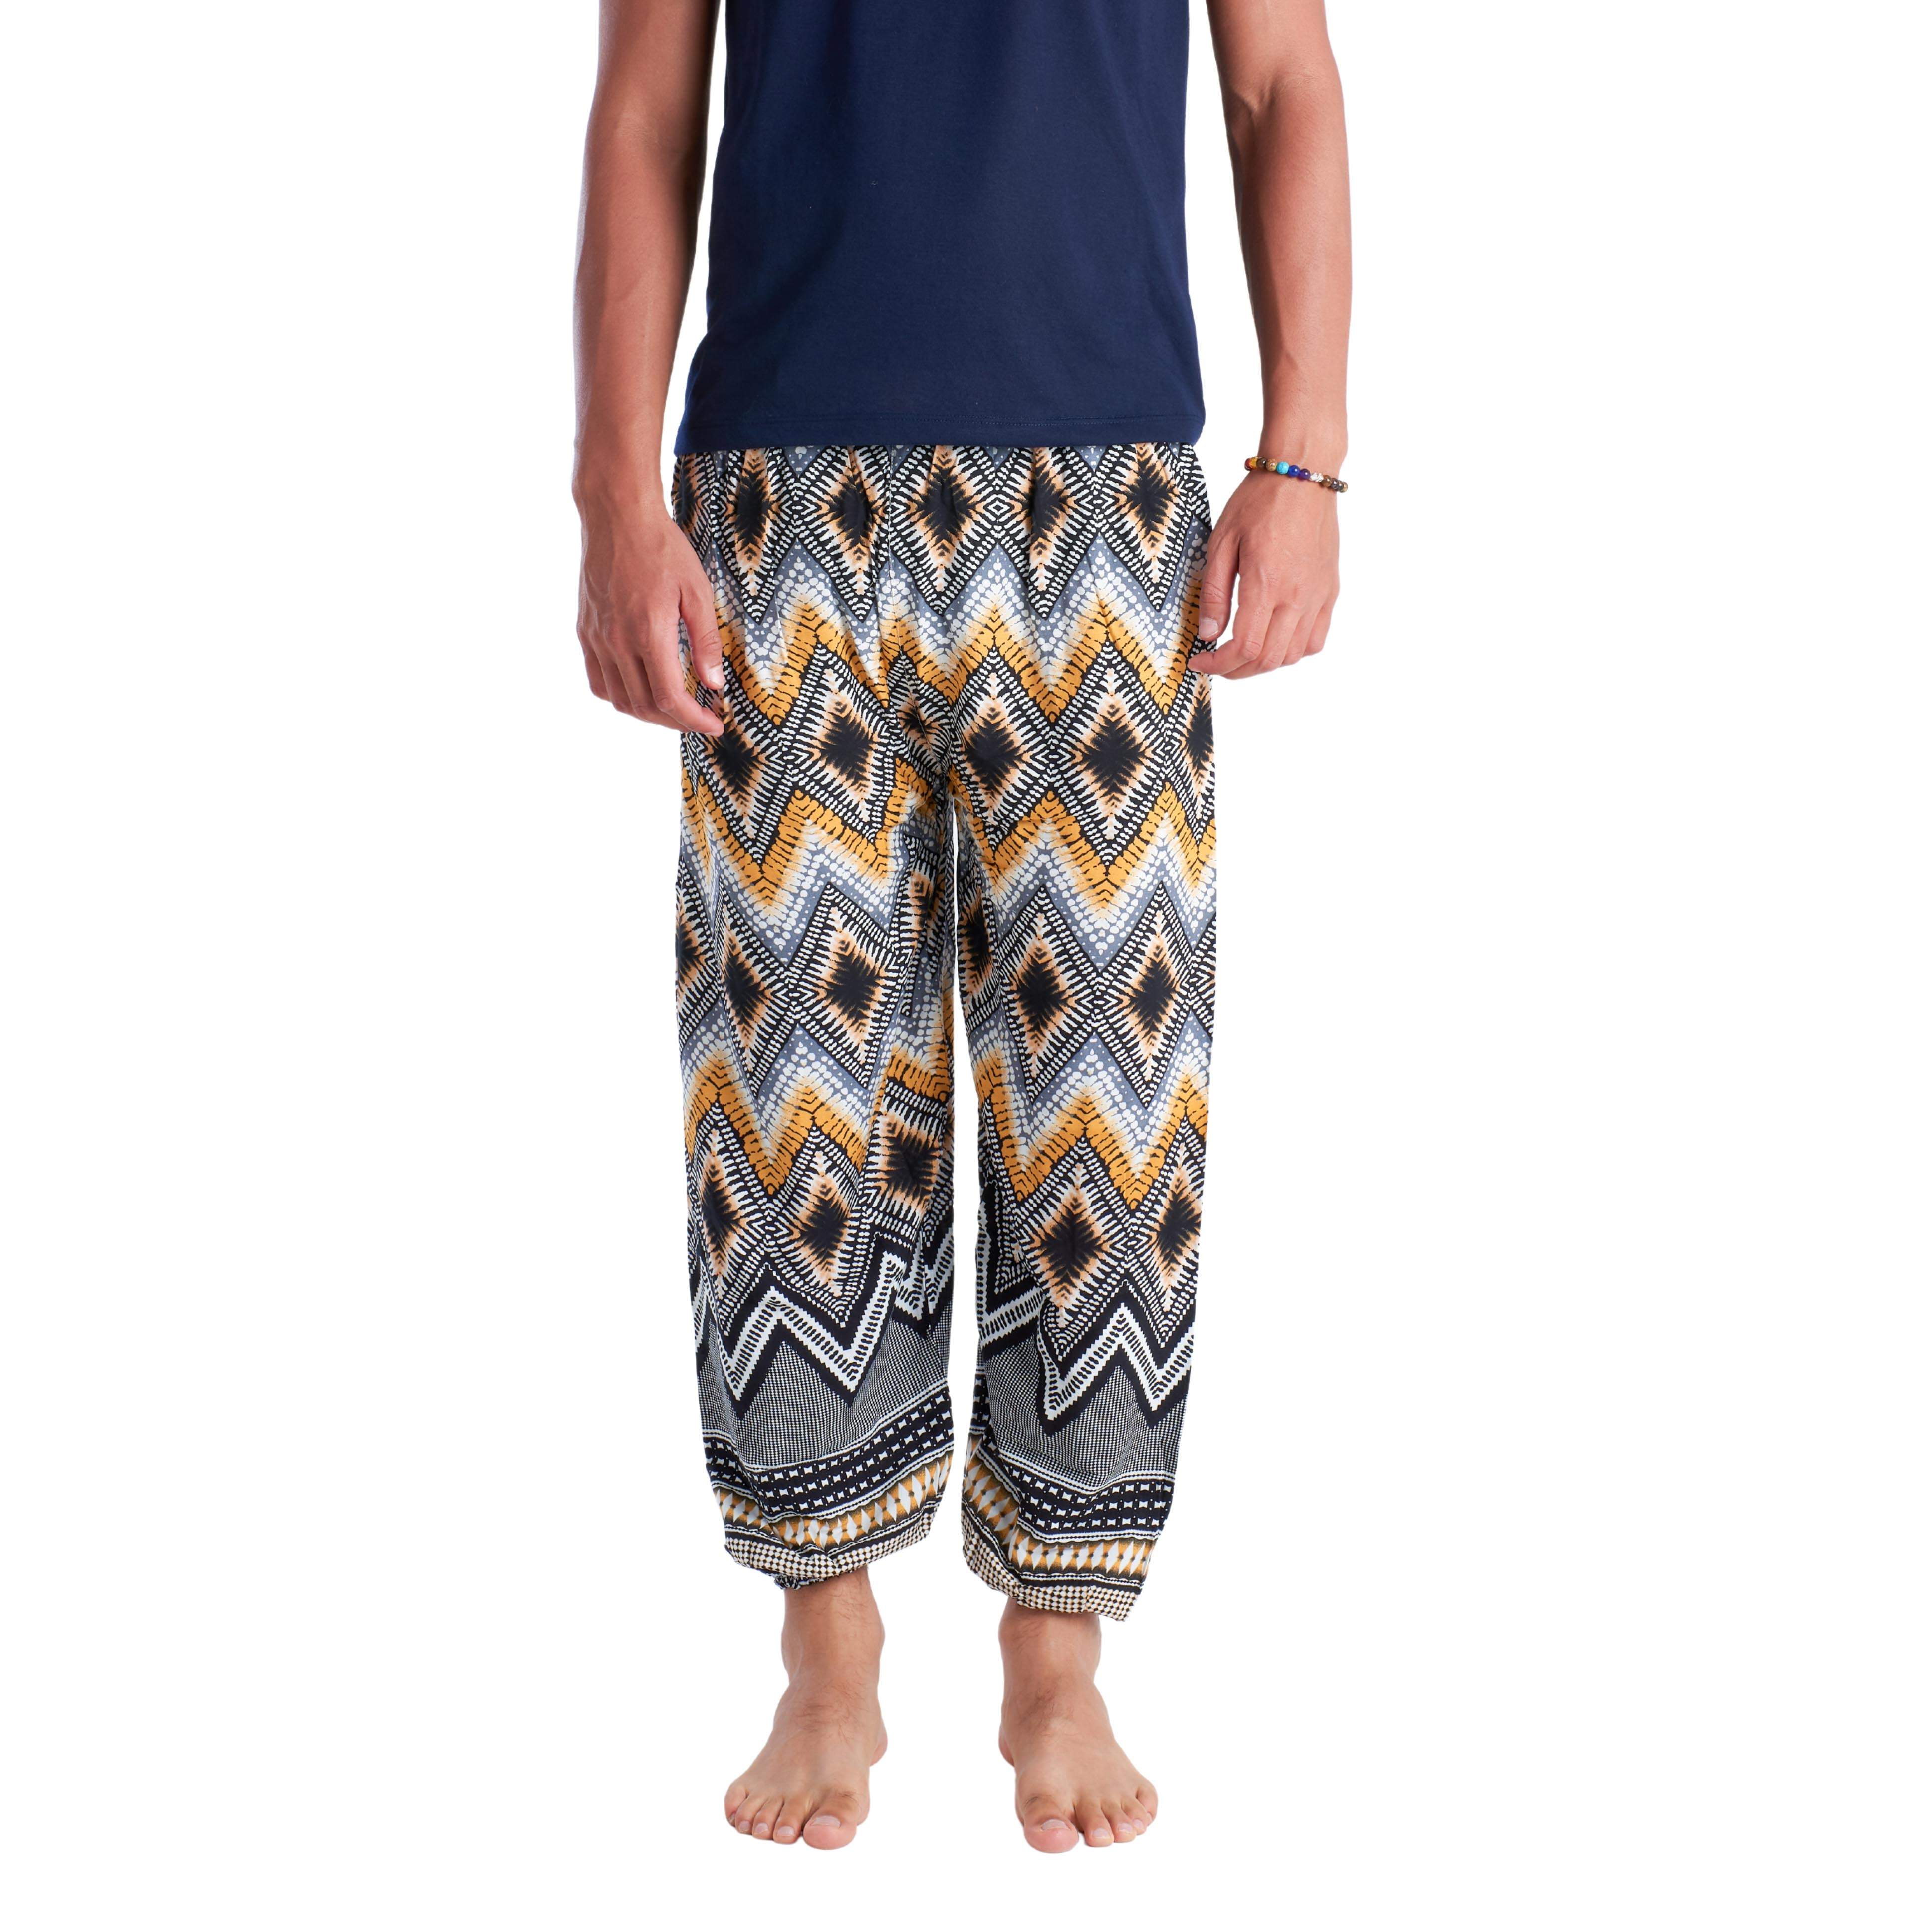 TABUK HIPPIE PANTS Elepanta Hippie Pants | Drawstring - Buy Today Elephant Pants Jewelry And Bohemian Clothes Handmade In Thailand Help To Save The Elephants FairTrade And Vegan